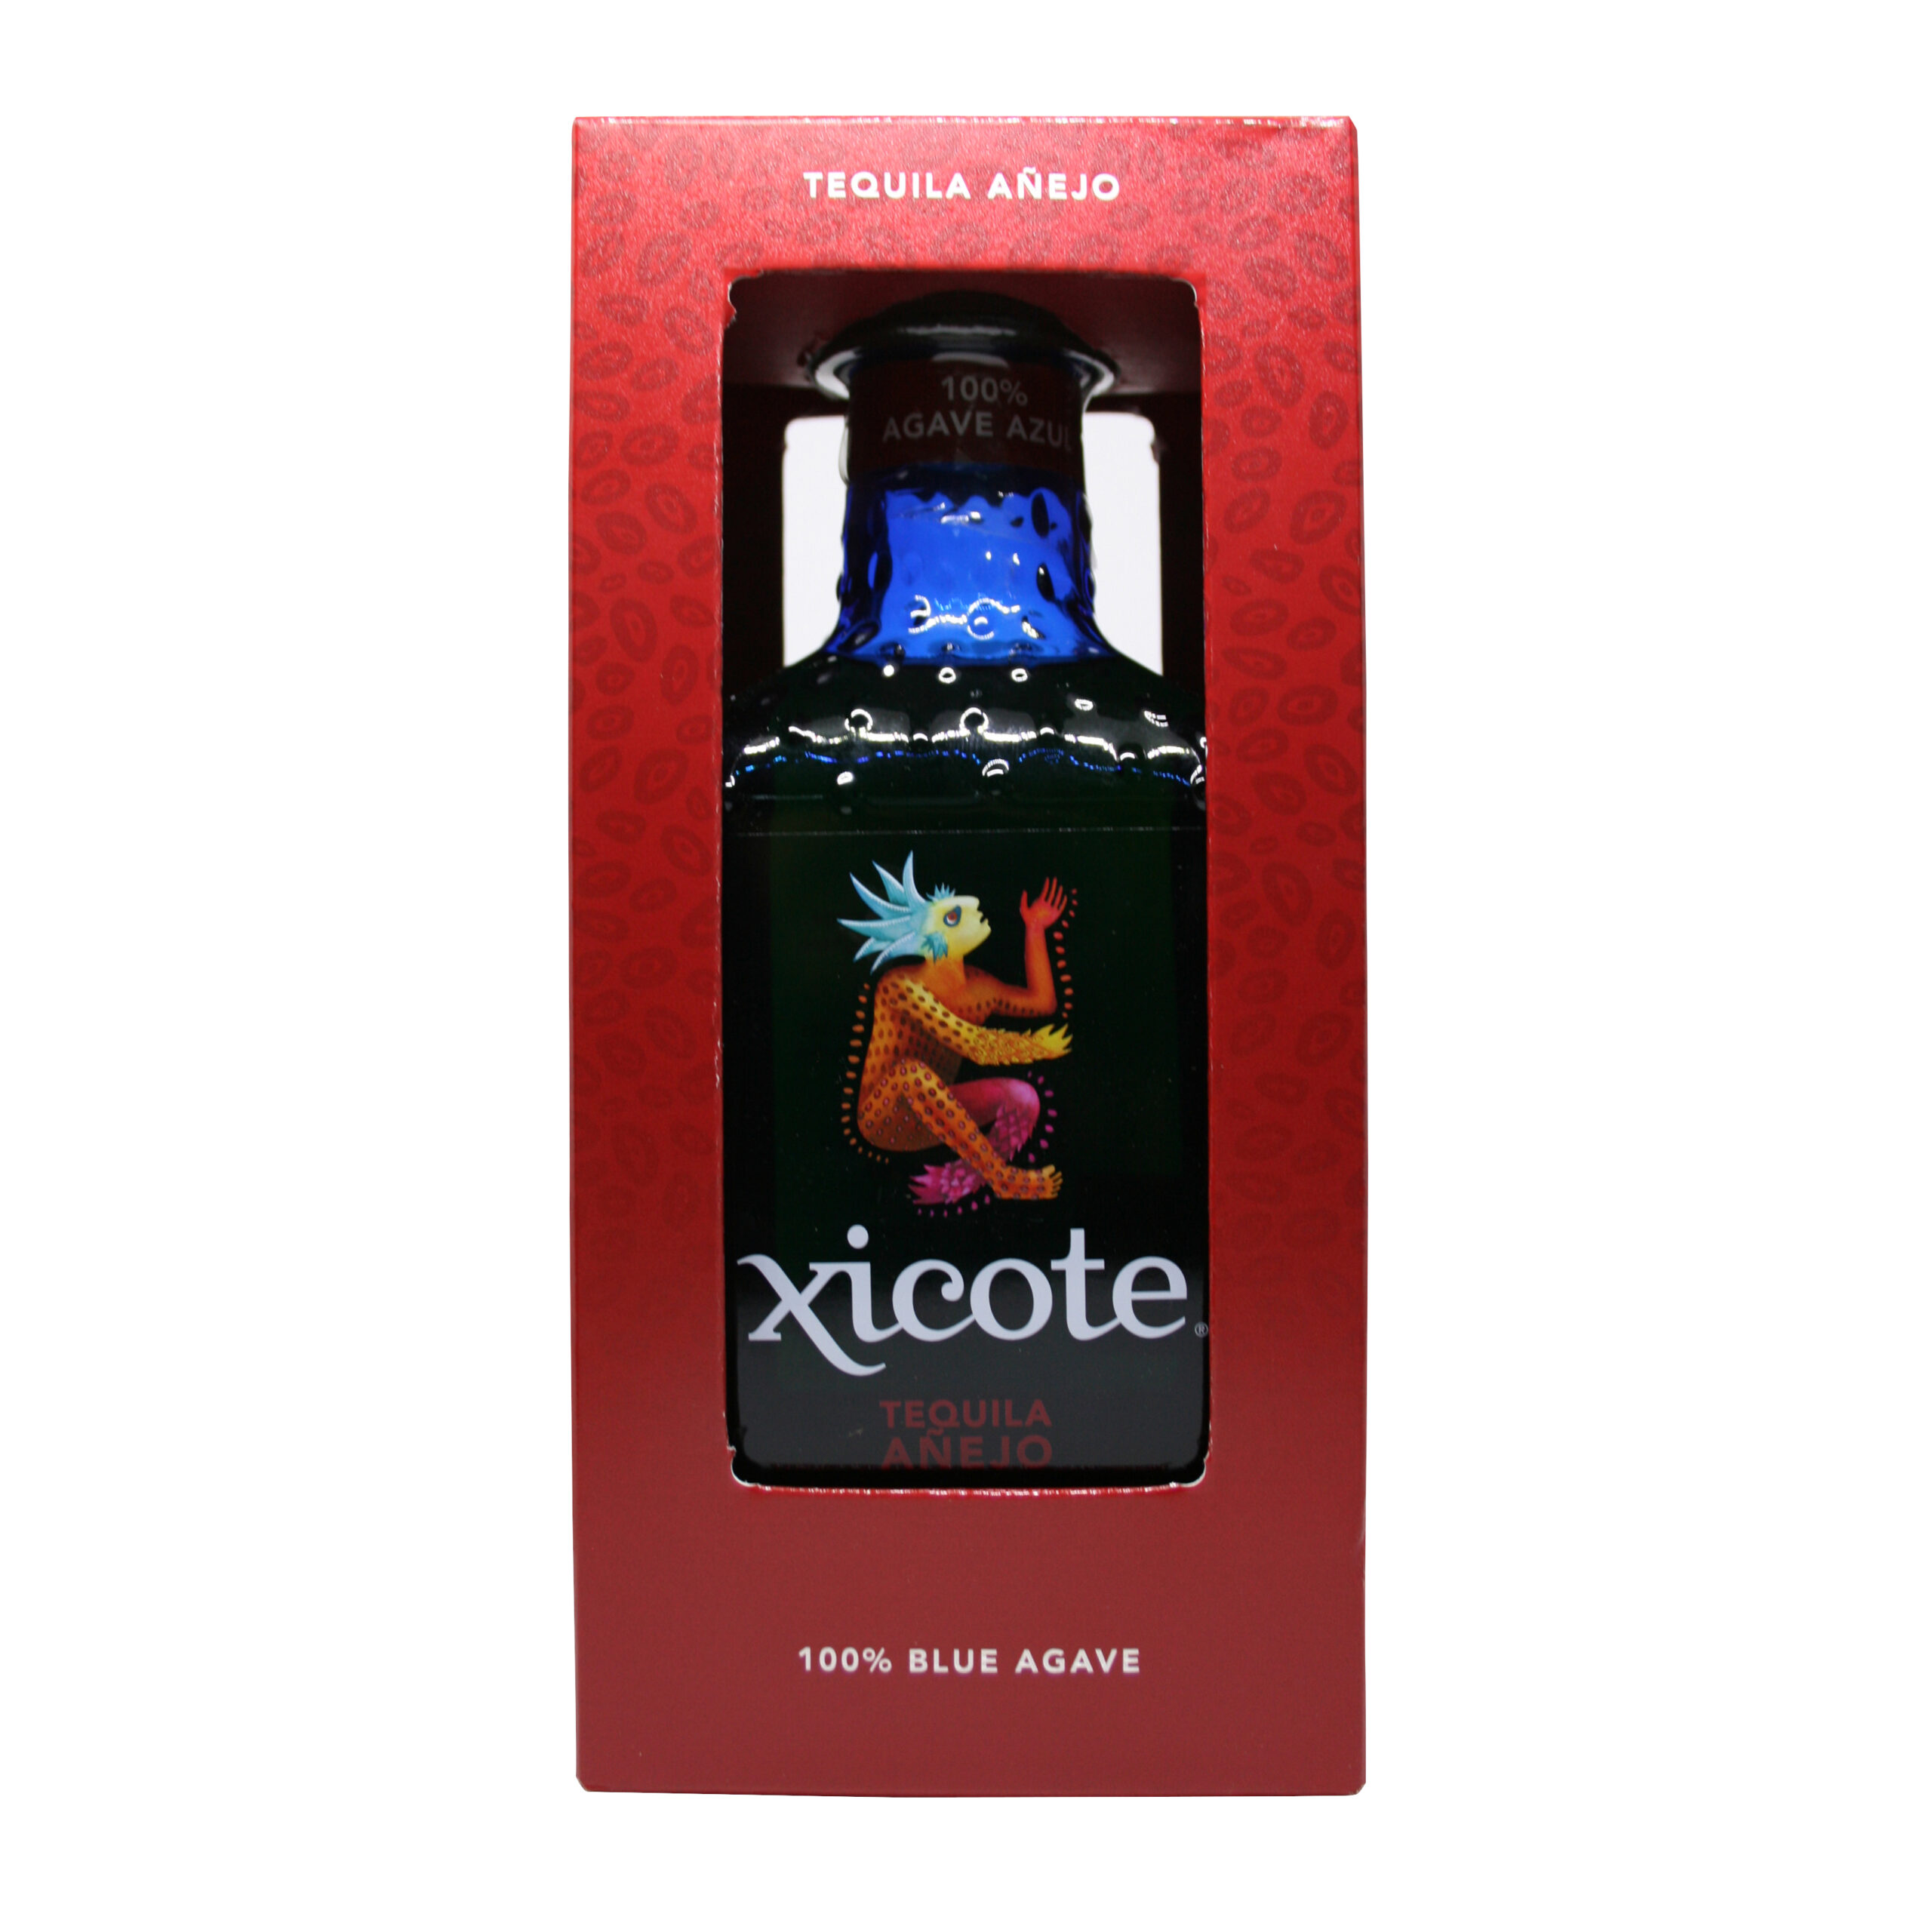 TEQUILA XICOTE ANEJO 700ml 40%Vol 100%Agave Flasche